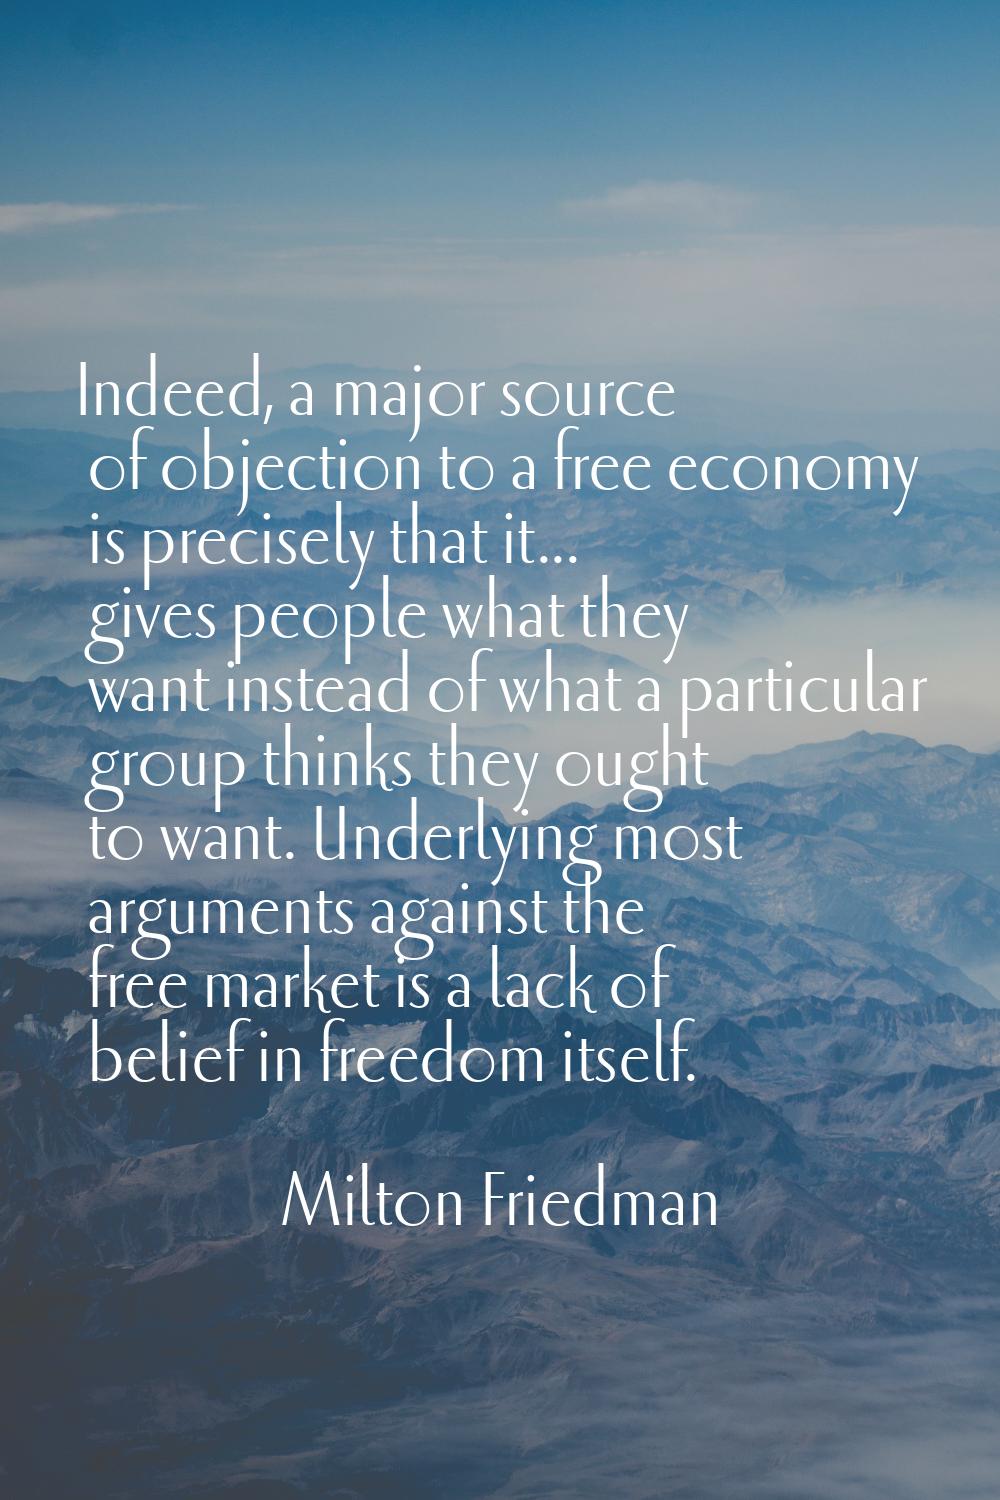 Indeed, a major source of objection to a free economy is precisely that it... gives people what the